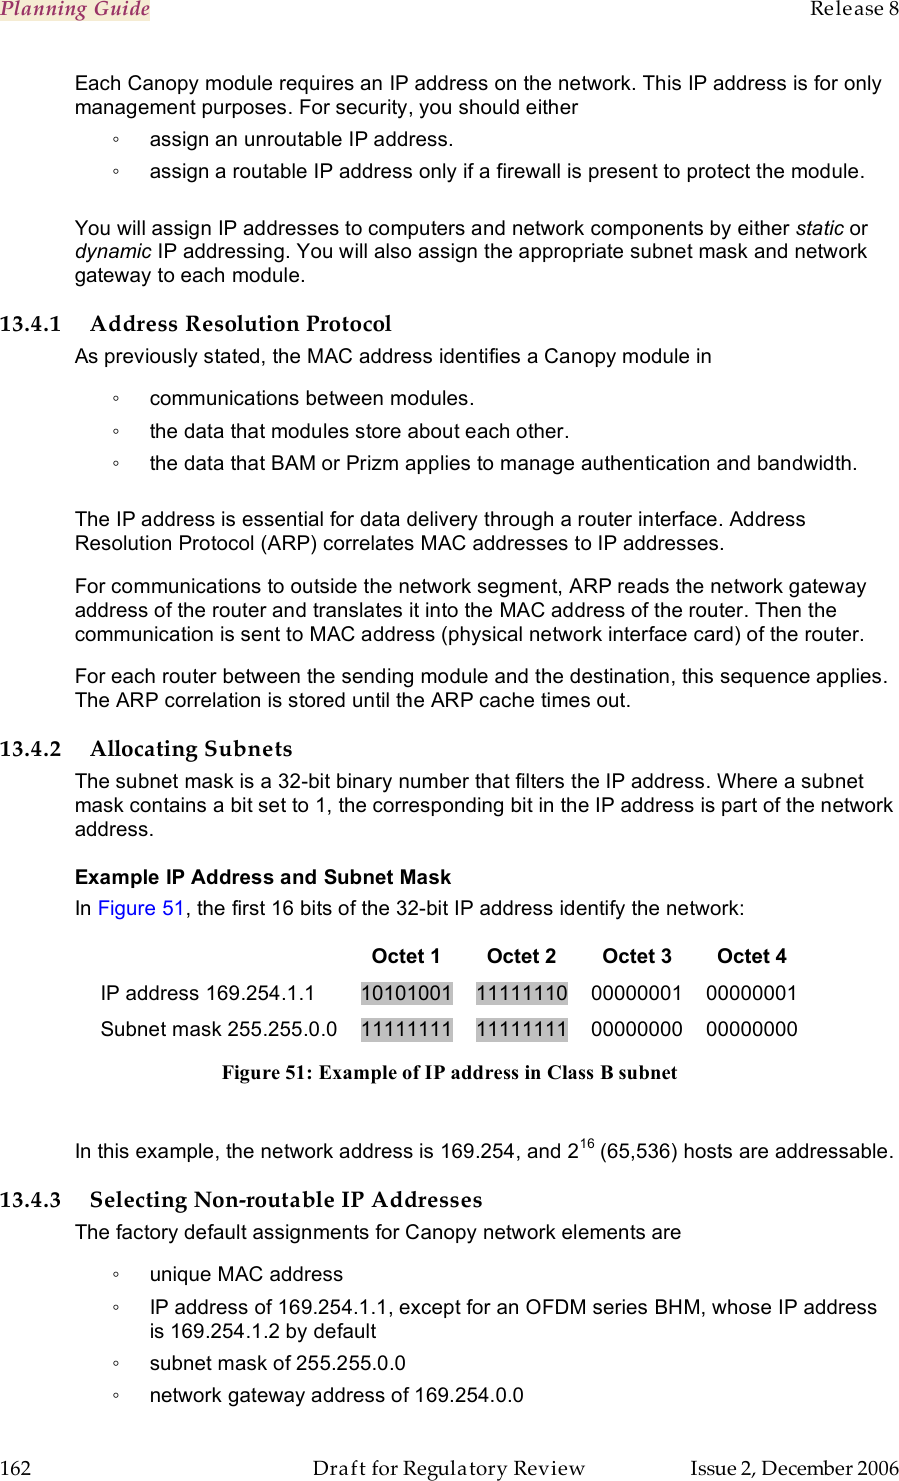 Planning Guide    Release 8   162  Draft for Regulatory Review  Issue 2, December 2006 Each Canopy module requires an IP address on the network. This IP address is for only management purposes. For security, you should either ◦  assign an unroutable IP address. ◦  assign a routable IP address only if a firewall is present to protect the module.   You will assign IP addresses to computers and network components by either static or dynamic IP addressing. You will also assign the appropriate subnet mask and network gateway to each module.  13.4.1 Address Resolution Protocol As previously stated, the MAC address identifies a Canopy module in ◦  communications between modules. ◦  the data that modules store about each other. ◦  the data that BAM or Prizm applies to manage authentication and bandwidth.  The IP address is essential for data delivery through a router interface. Address Resolution Protocol (ARP) correlates MAC addresses to IP addresses. For communications to outside the network segment, ARP reads the network gateway address of the router and translates it into the MAC address of the router. Then the communication is sent to MAC address (physical network interface card) of the router. For each router between the sending module and the destination, this sequence applies. The ARP correlation is stored until the ARP cache times out. 13.4.2 Allocating Subnets The subnet mask is a 32-bit binary number that filters the IP address. Where a subnet mask contains a bit set to 1, the corresponding bit in the IP address is part of the network address.    Example IP Address and Subnet Mask In Figure 51, the first 16 bits of the 32-bit IP address identify the network:  Octet 1 Octet 2 Octet 3 Octet 4 IP address 169.254.1.1 10101001 11111110 00000001 00000001 Subnet mask 255.255.0.0 11111111 11111111 00000000 00000000 Figure 51: Example of IP address in Class B subnet  In this example, the network address is 169.254, and 216 (65,536) hosts are addressable.  13.4.3 Selecting Non-routable IP Addresses The factory default assignments for Canopy network elements are ◦  unique MAC address ◦  IP address of 169.254.1.1, except for an OFDM series BHM, whose IP address is 169.254.1.2 by default ◦  subnet mask of 255.255.0.0 ◦  network gateway address of 169.254.0.0 